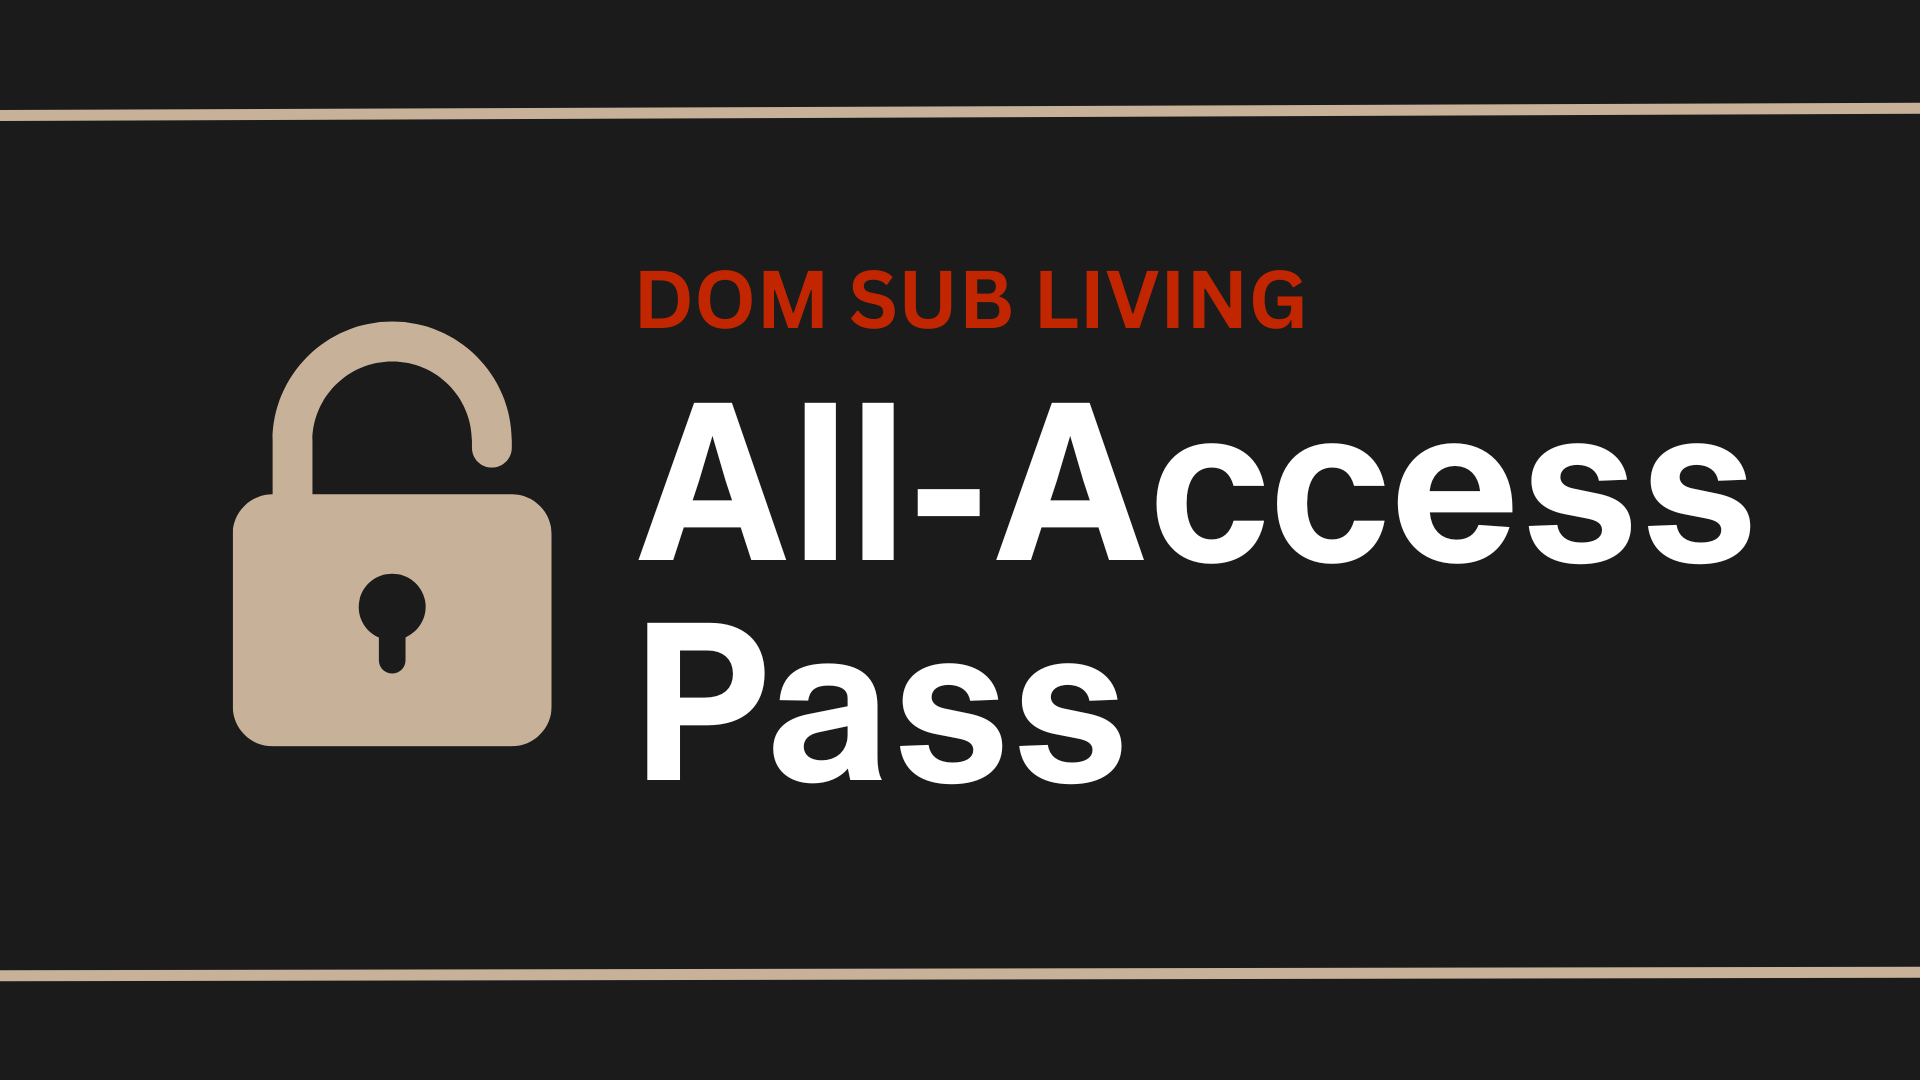 Get access to all our BDSM courses with our All-Access BDSM Program

